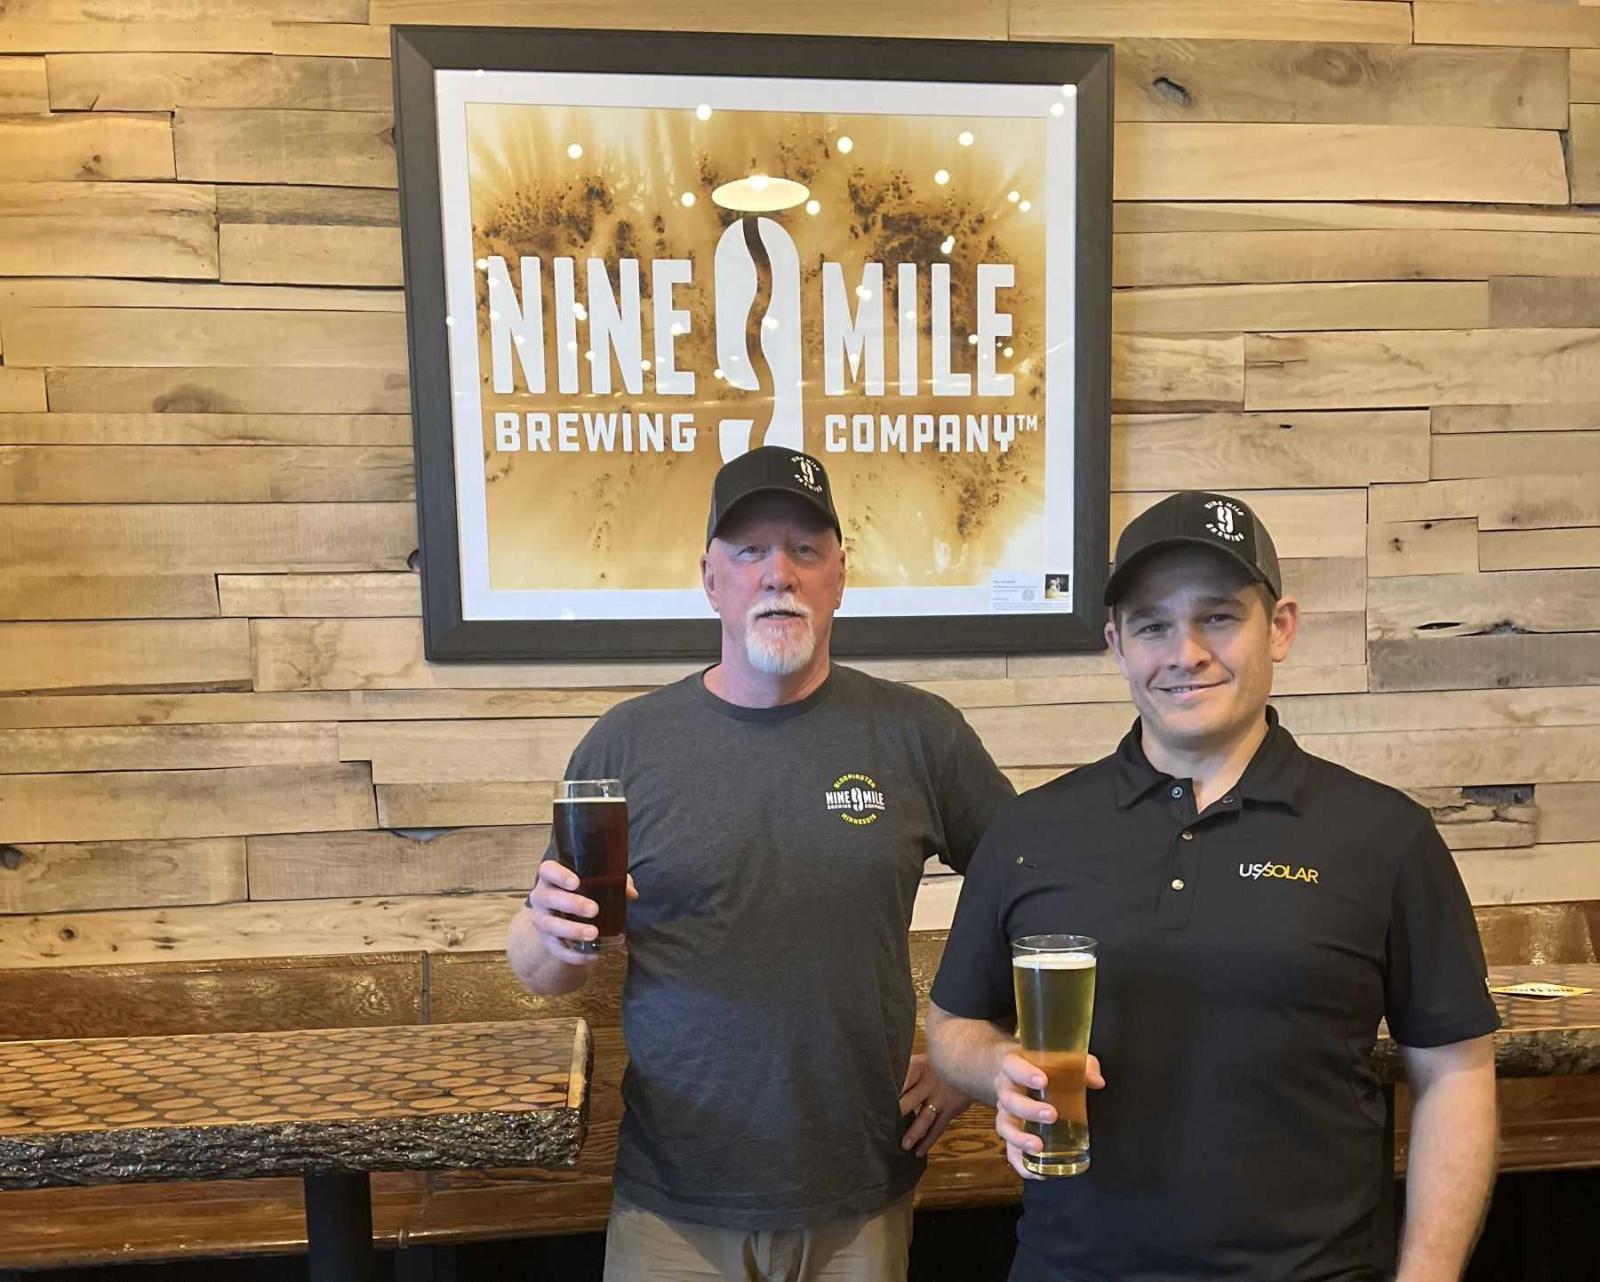 Bob Countryman and Ilan Klages-Mundt hold beers in front of a Nine Mile sign in their brewery.